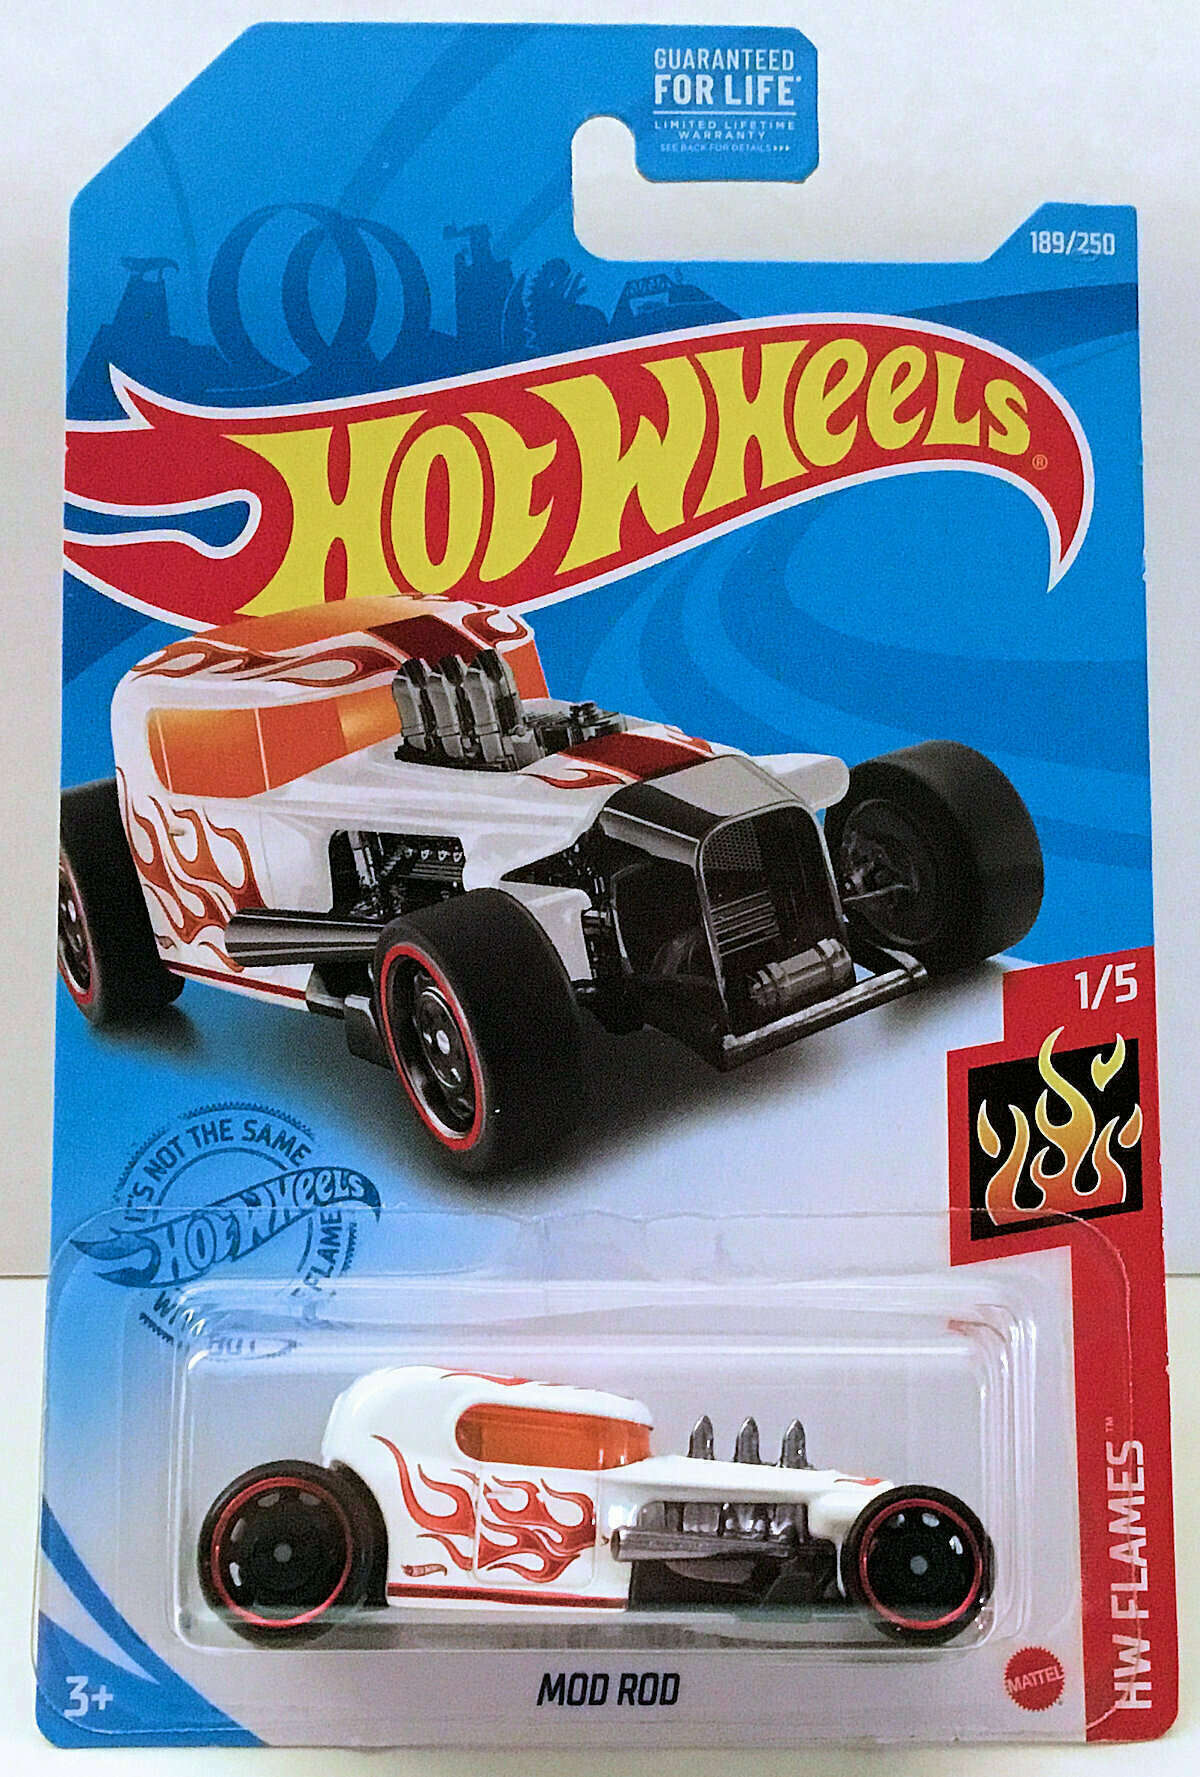 Hot Wheels 2021 - Collector # 189/250 - HW Flames 1/5 - Mod Rod - White